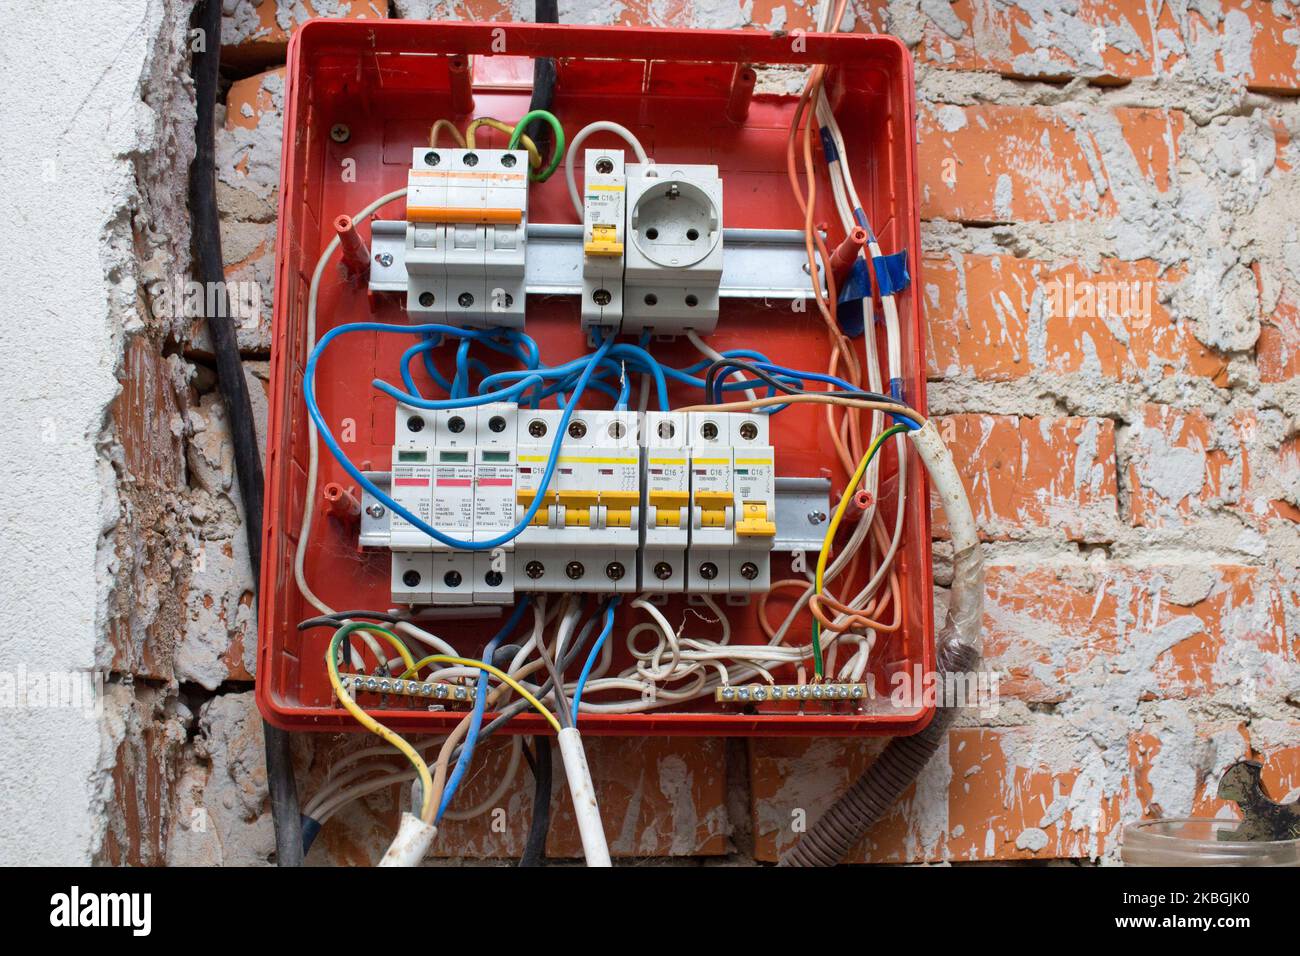 Electric distribution panels at home on a brick wall Stock Photo